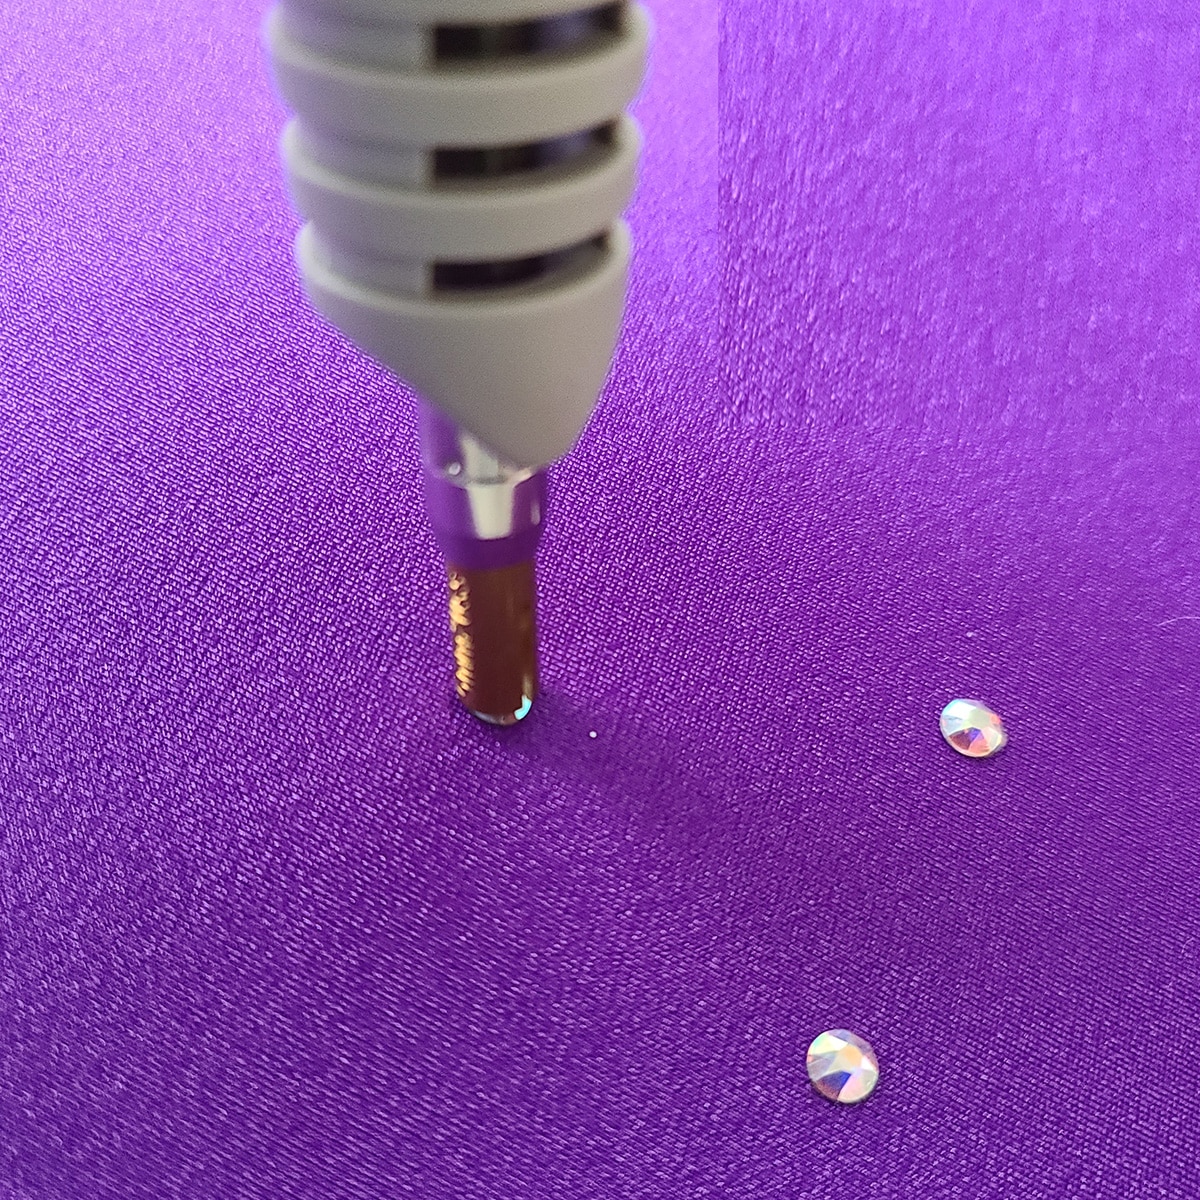 A hotfix iron is applying a crystal to a piece of purple spandex.